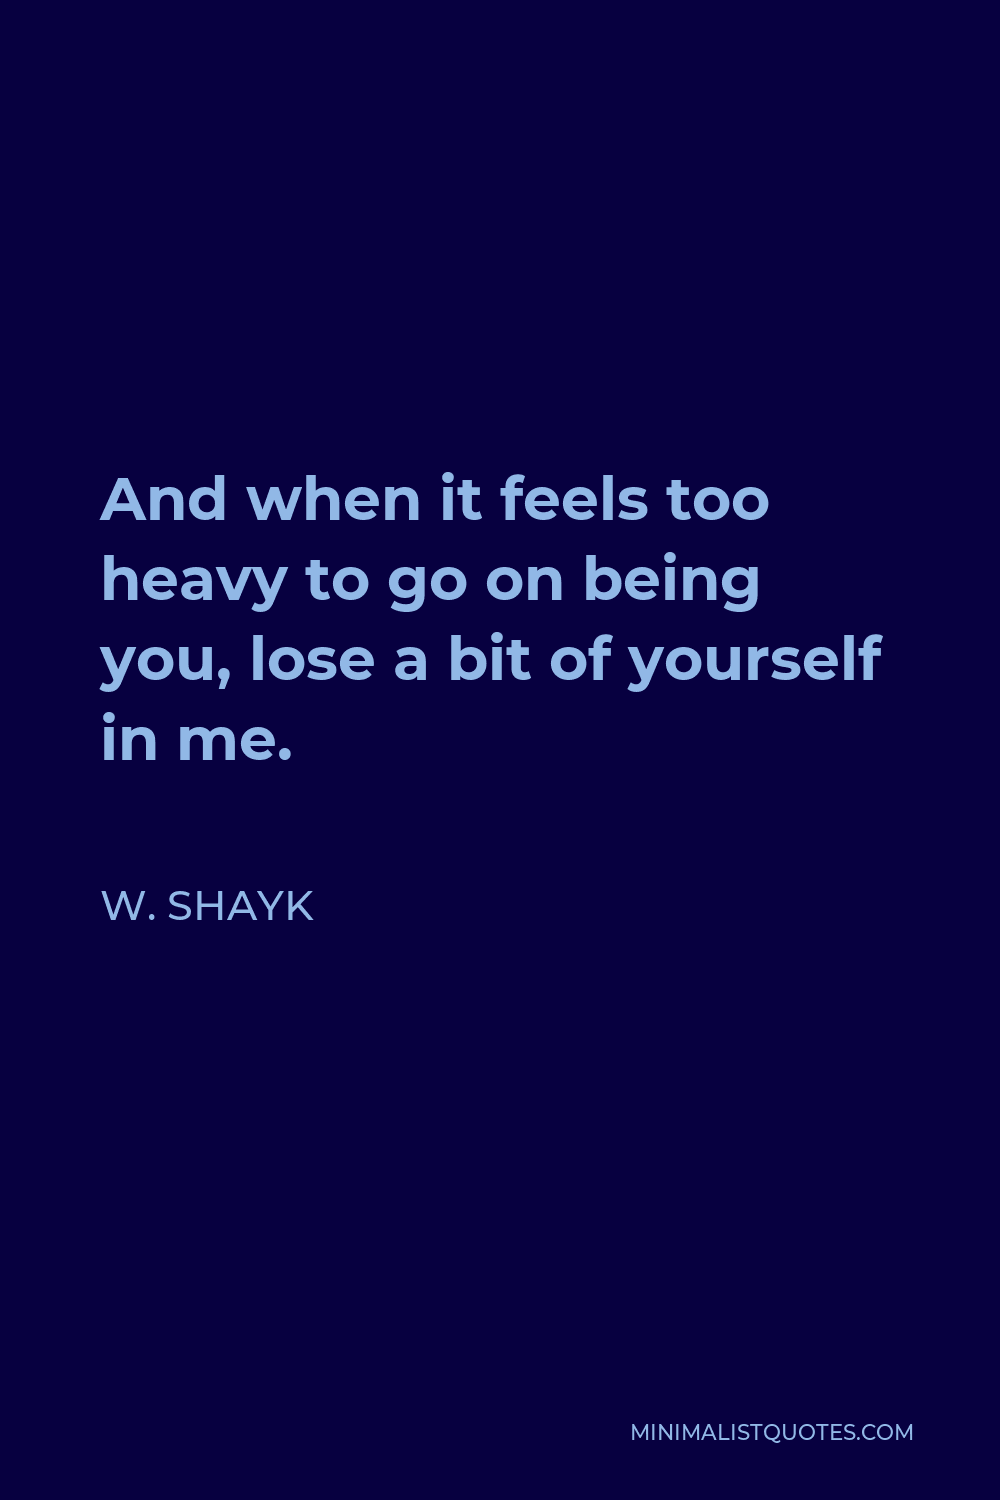 W. Shayk Quote - And when it feels too heavy to go on being you, lose a bit of yourself in me.